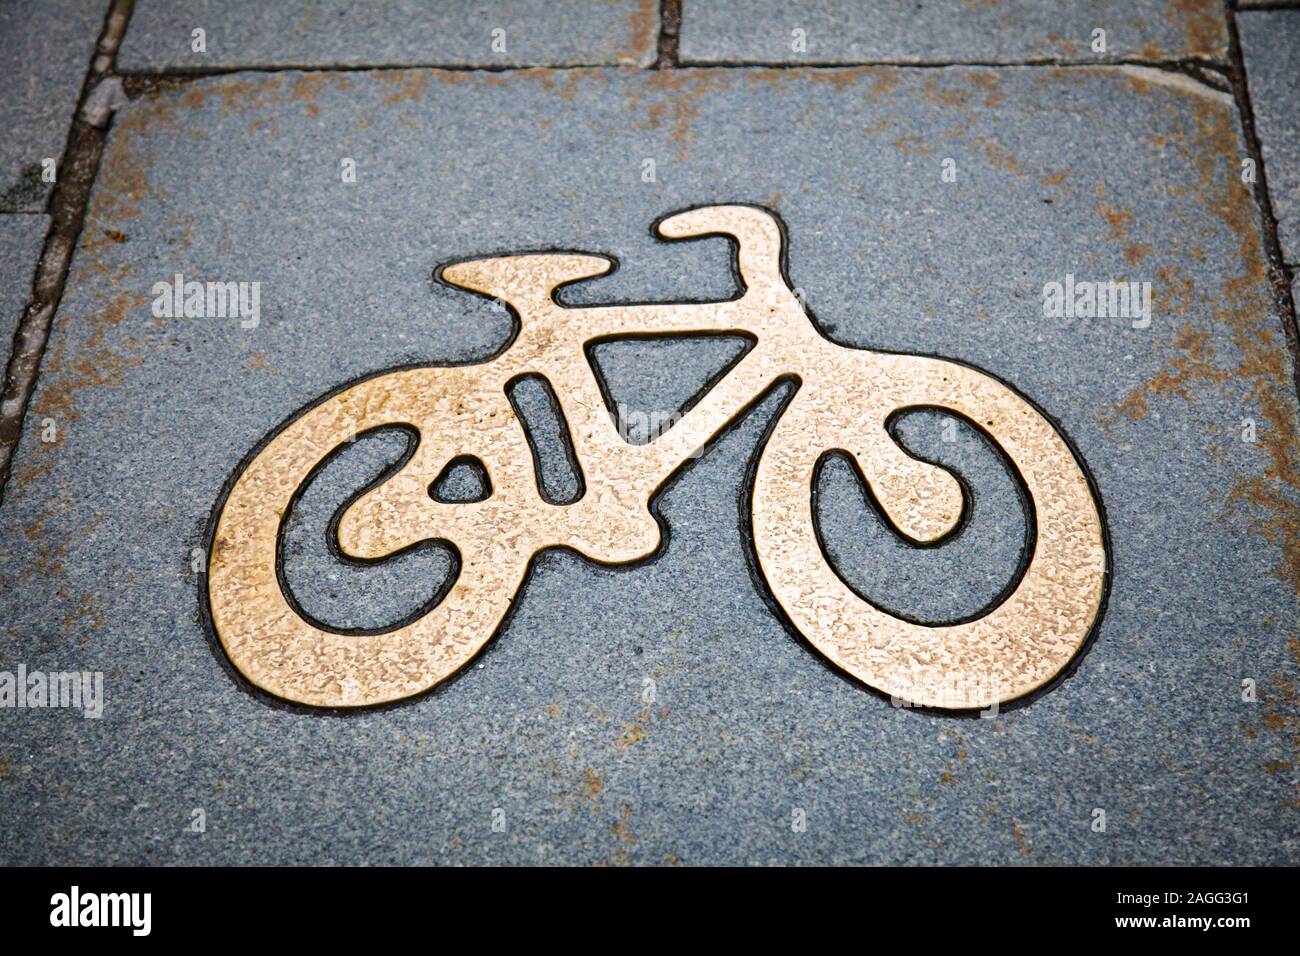 Bike lane sign made of brass or bronze in granite tile on a cycle track in Stockholm, Sweden, Scandinavia Stock Photo